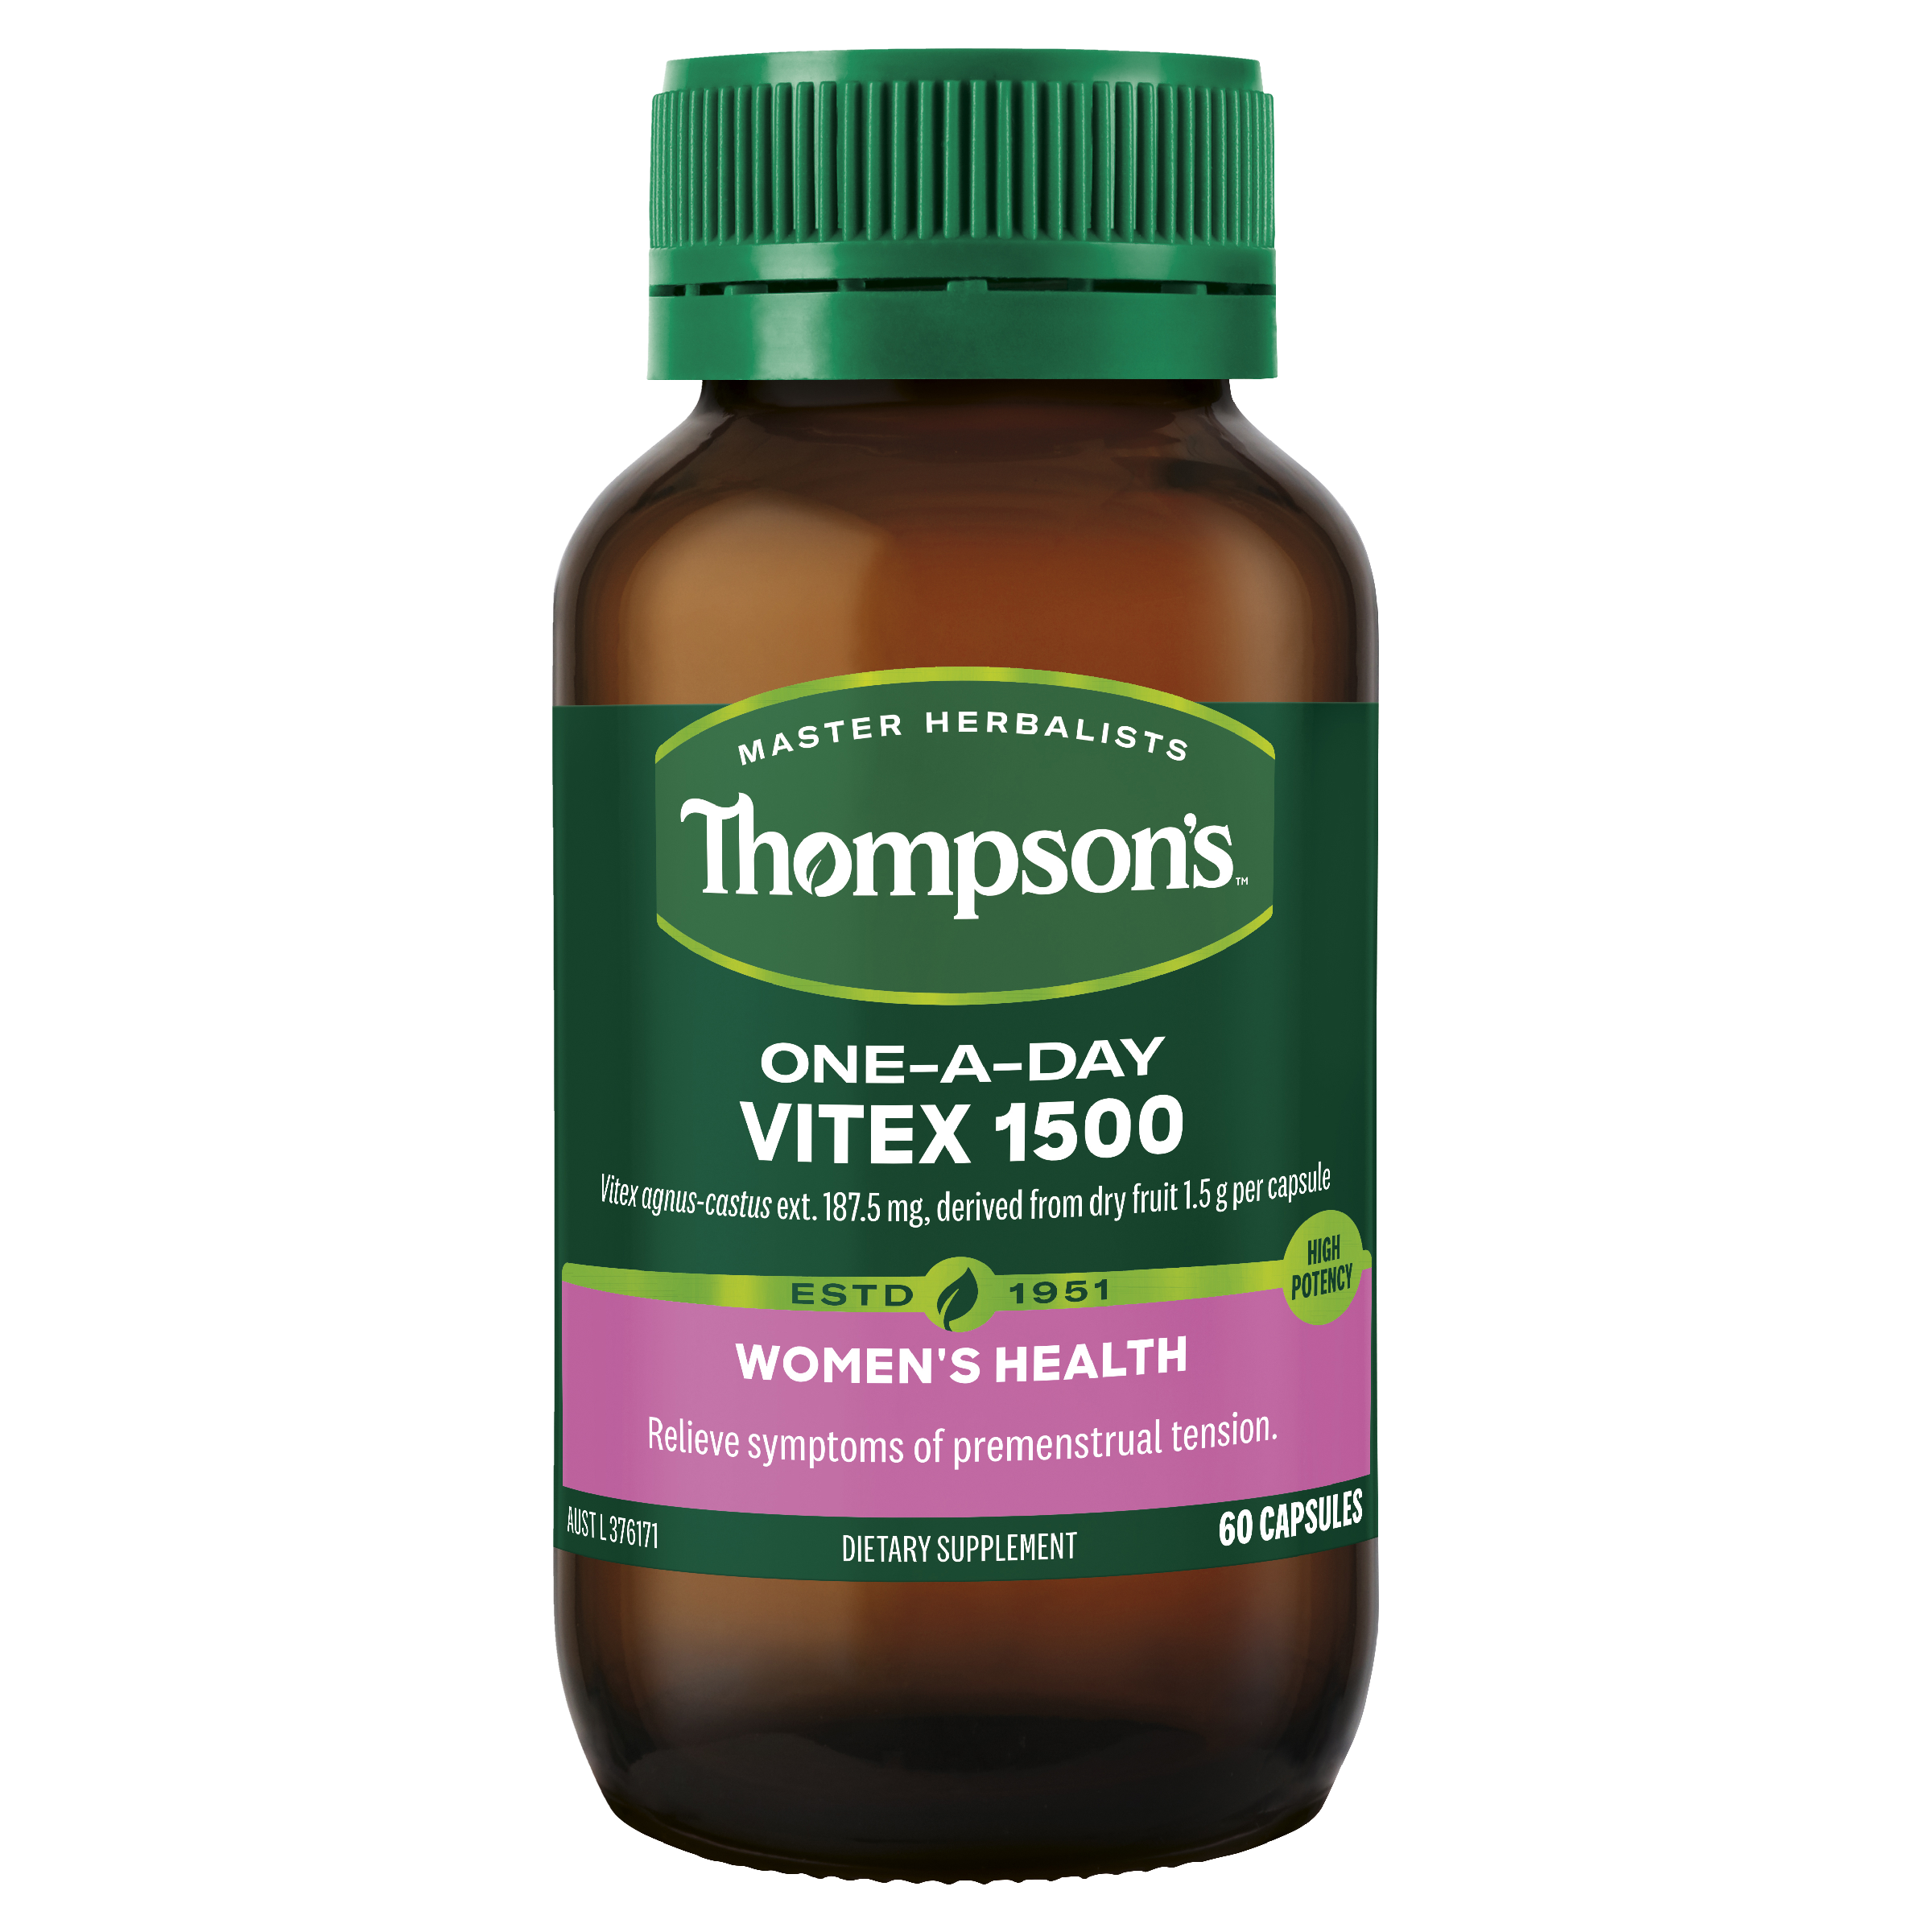 Thompsons One-A-Day Vitex 1500 60 Capsules